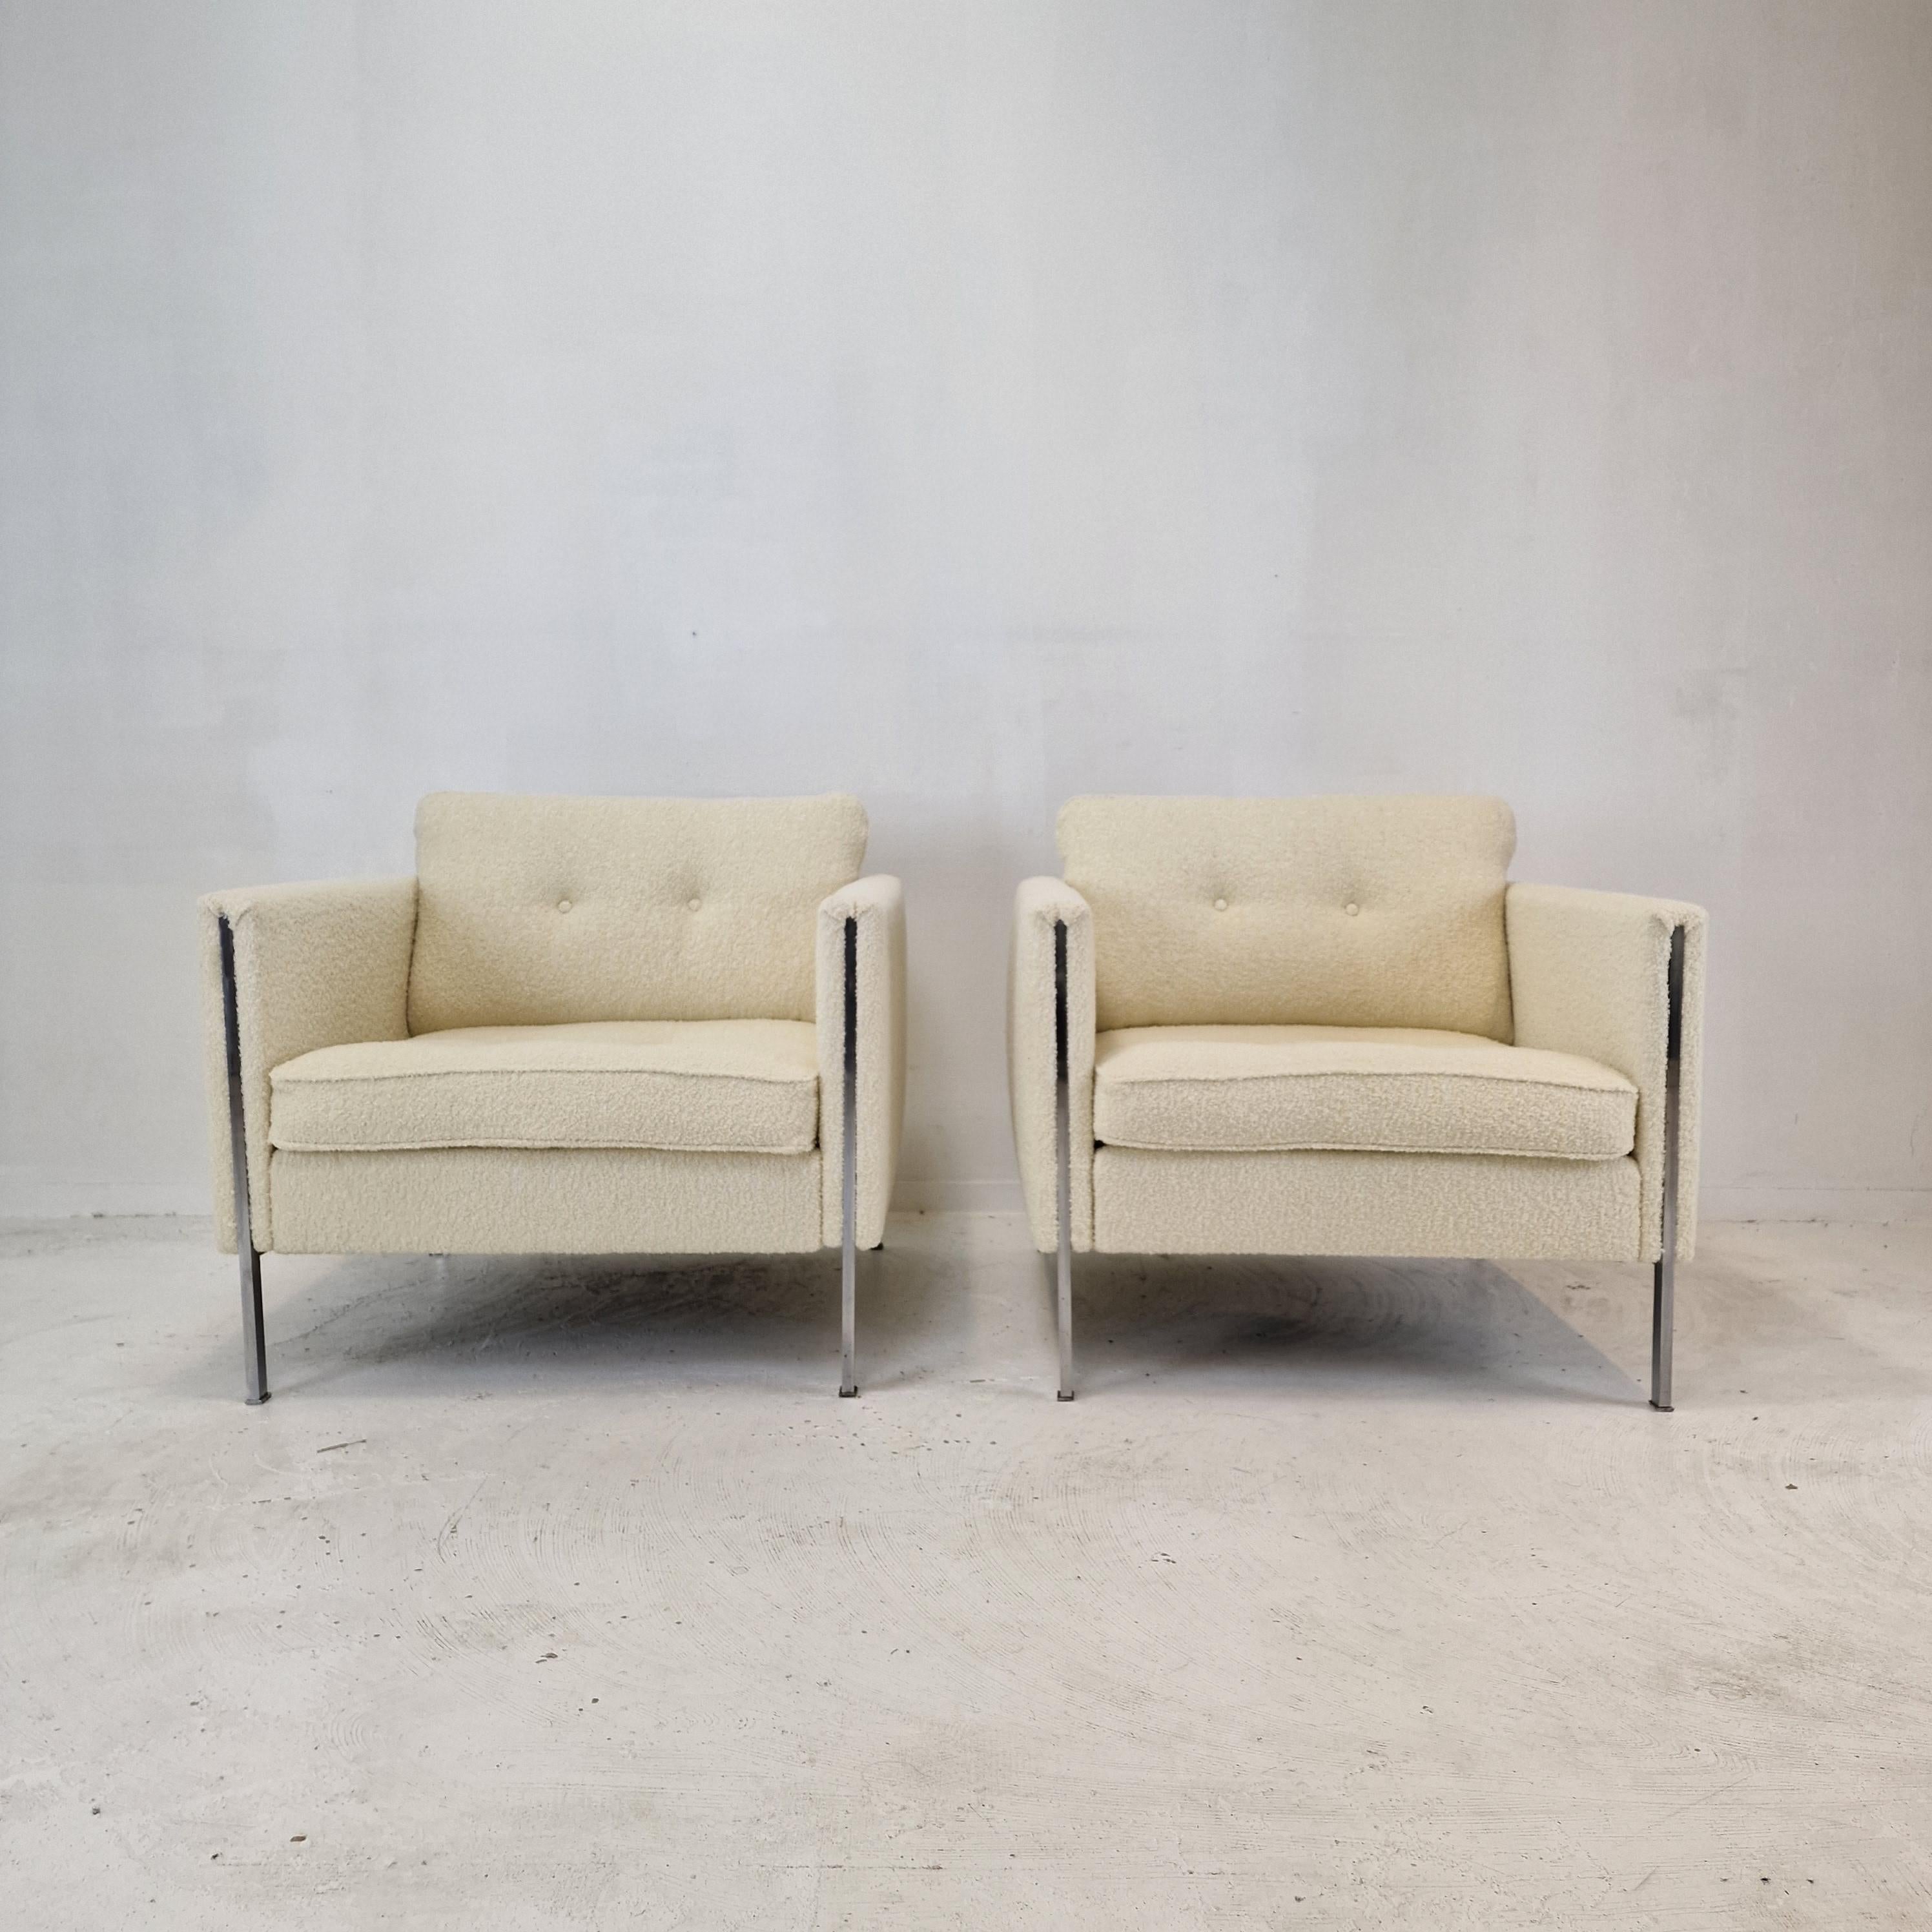 Mid-Century Modern Midcentury Set of 2 Model 442 Chairs by Pierre Paulin for Artifort, 1960s For Sale